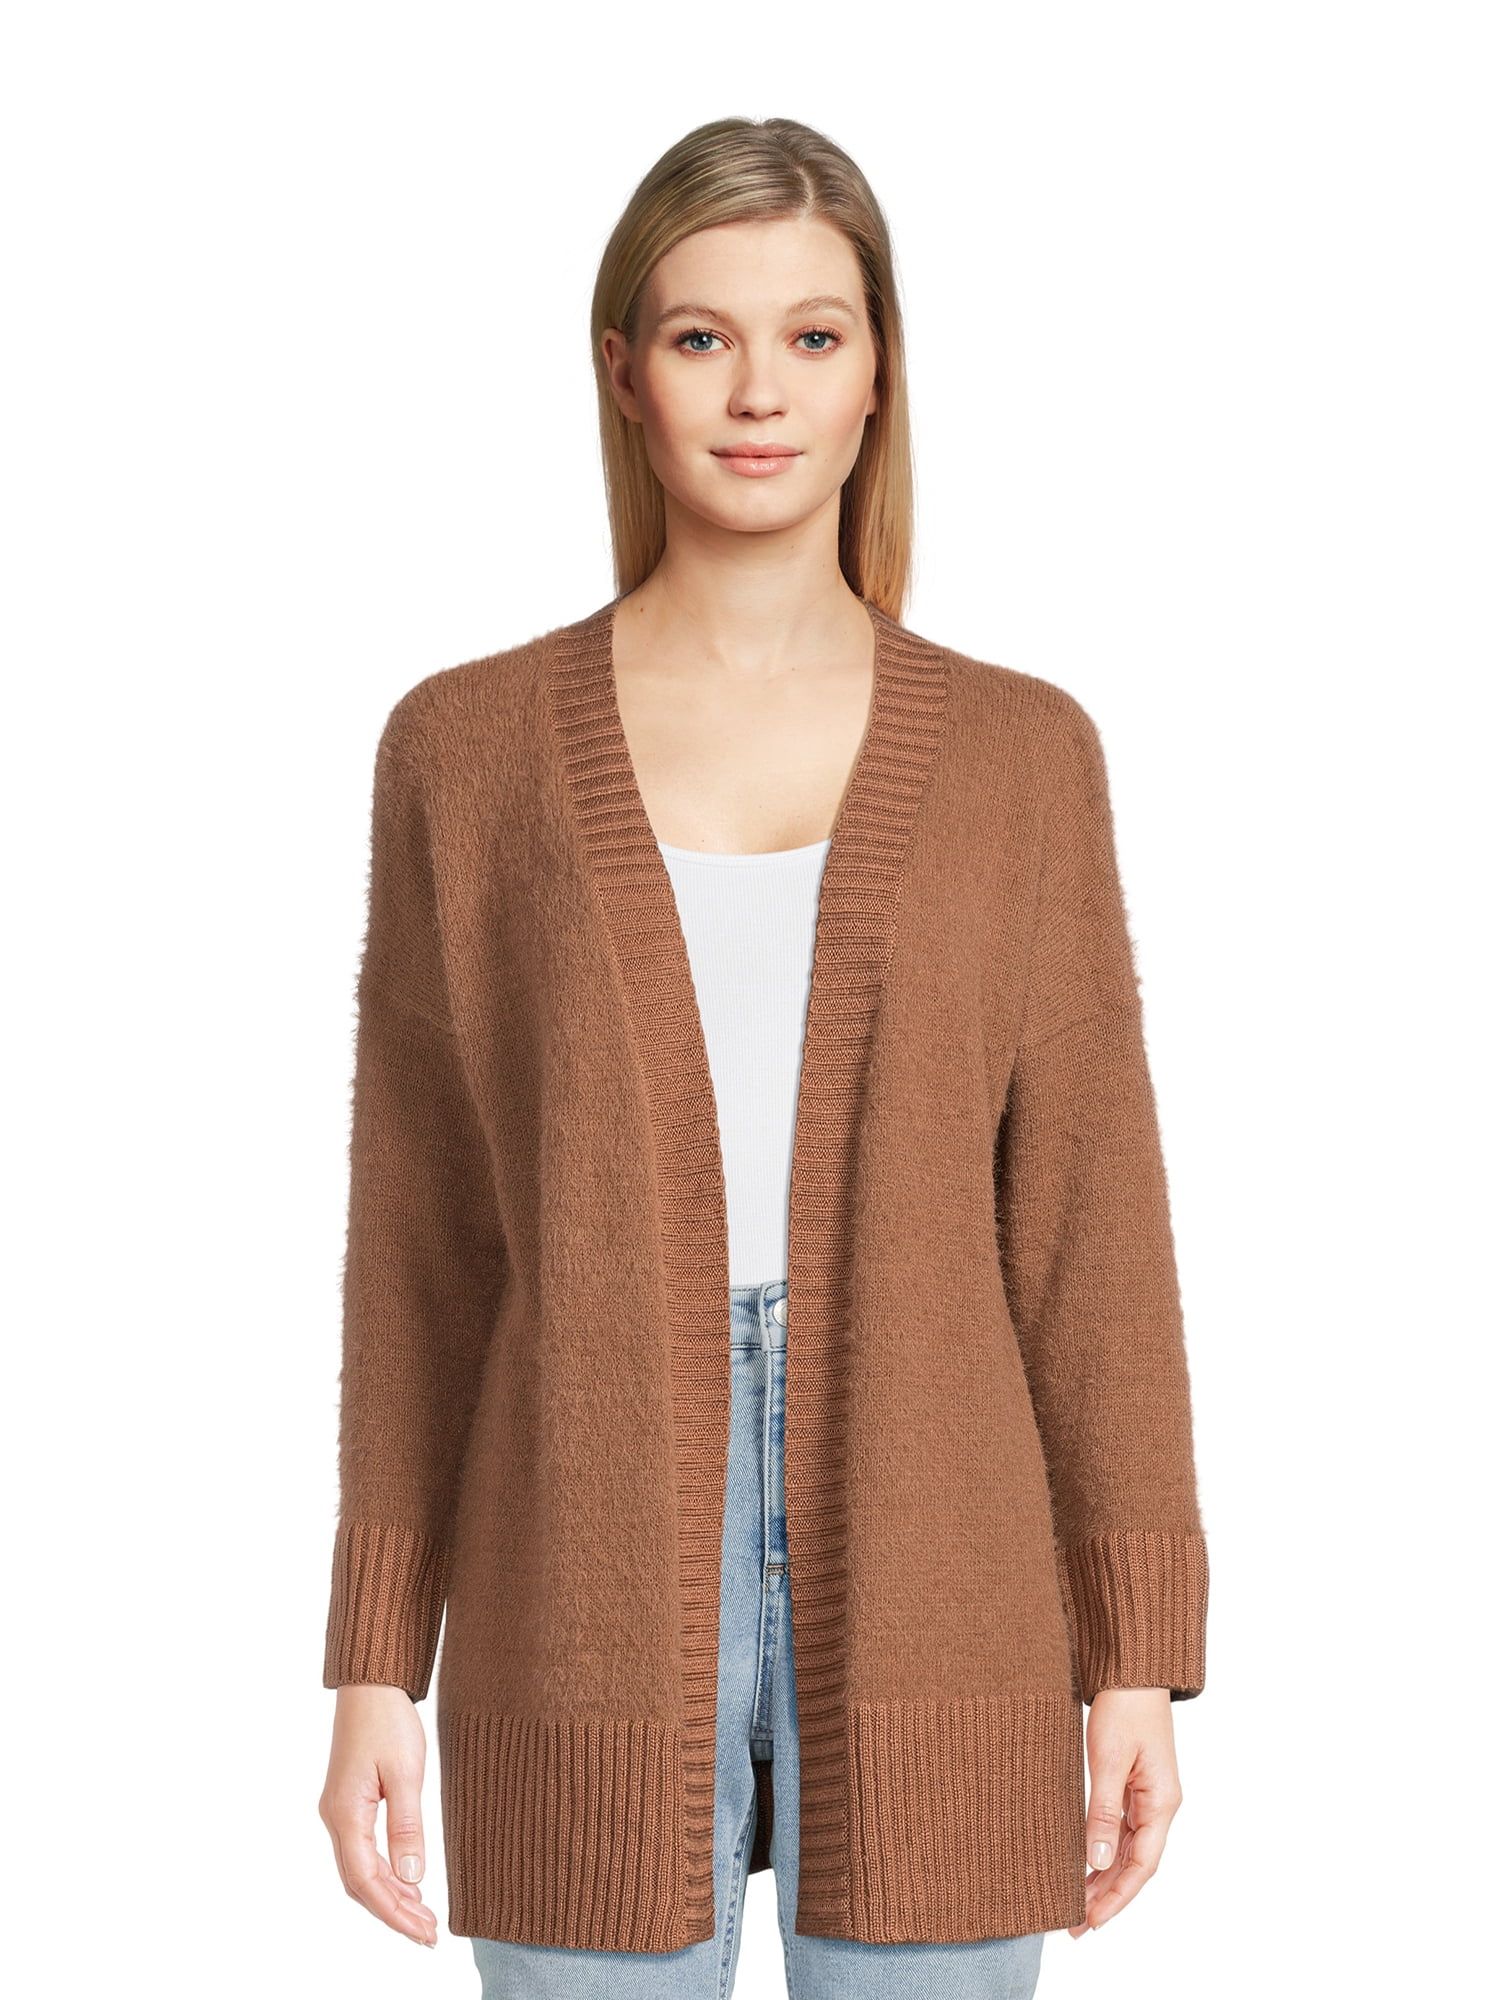 Dreamers by Debut Women's Open Front Cardigan Sweater, Midweight, Sizes XS-XL | Walmart (US)